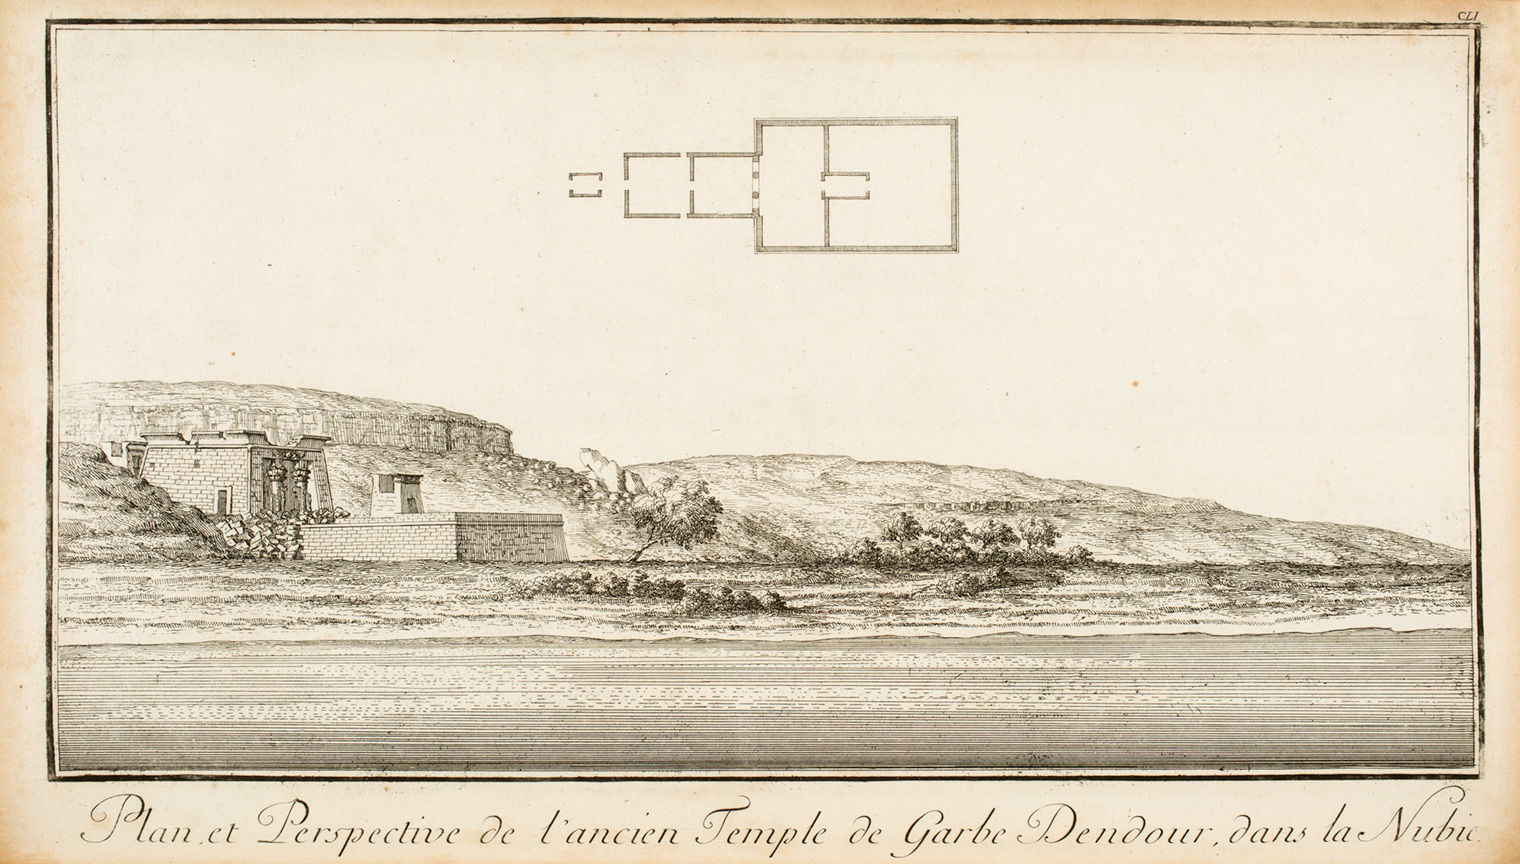 A illustration of the plan and perspective of the ancient temple of West Dendur in Nubia.